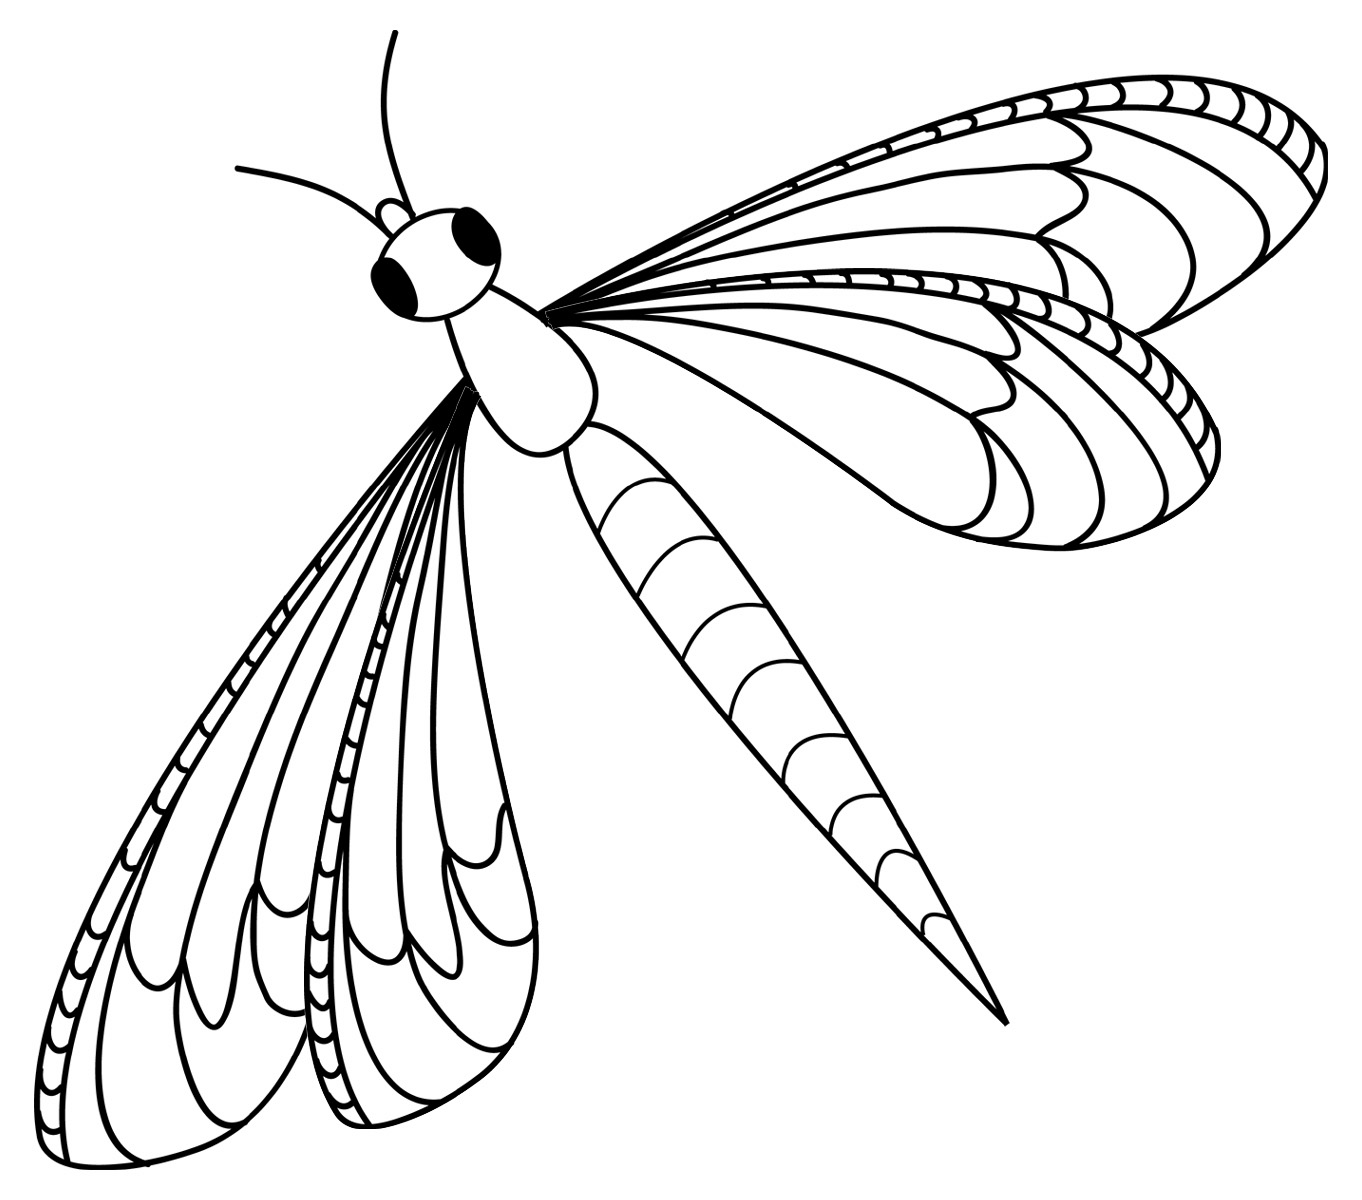 dragonfly-9877-animals-free-printable-coloring-pages